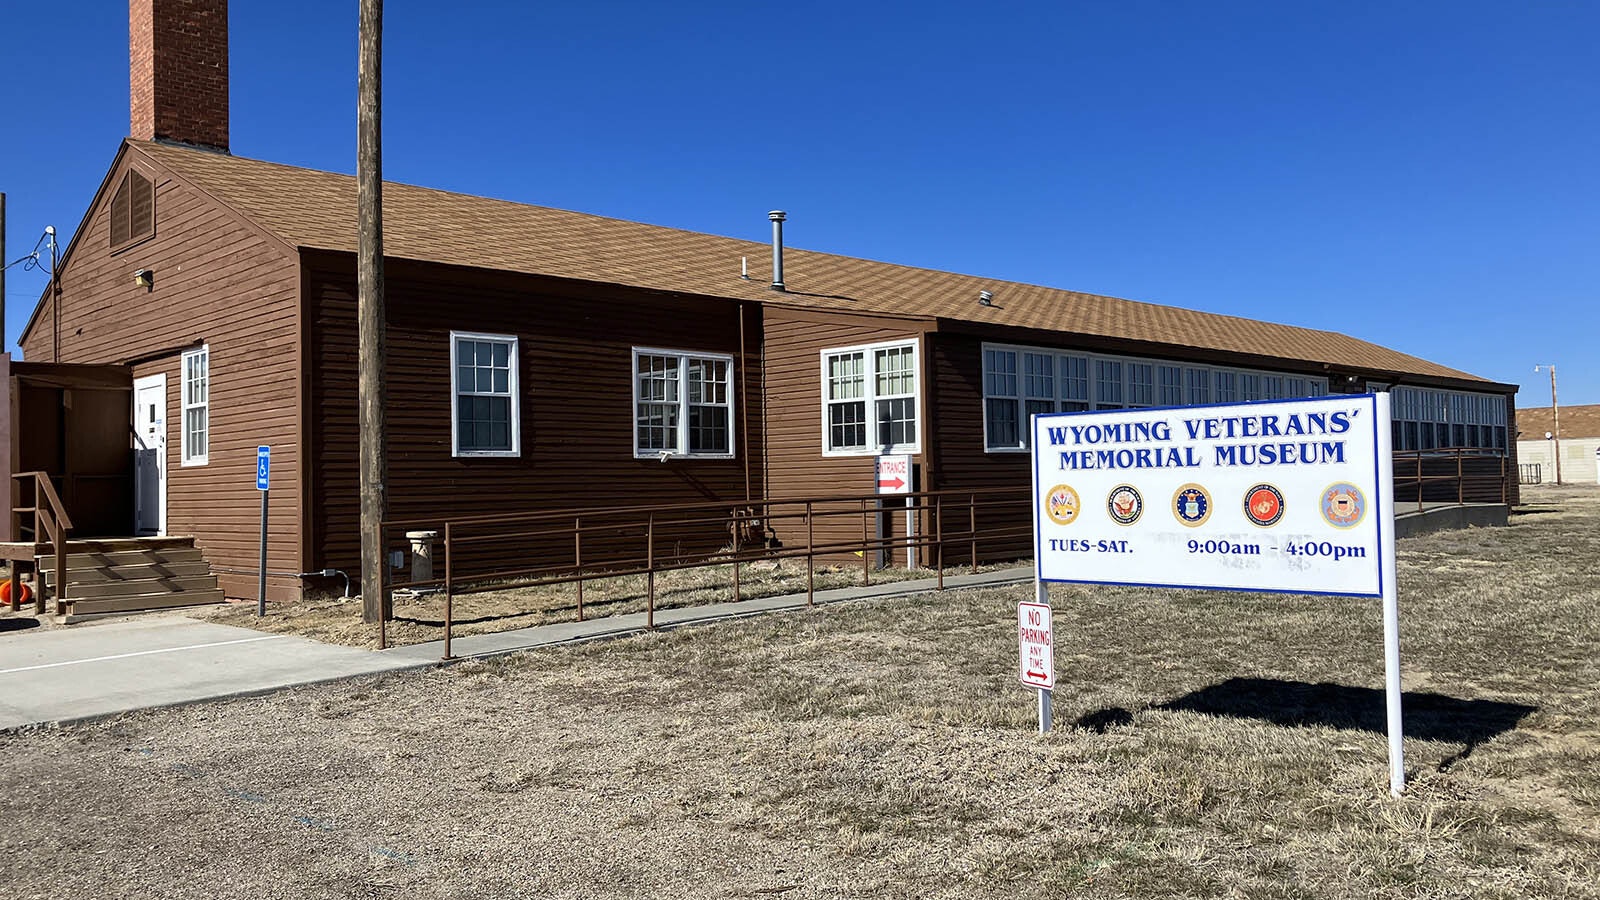 The Wyoming Veterans Memorial Museum is housed in the former enlisted men’s club building at the former Casper Army Air Base site.